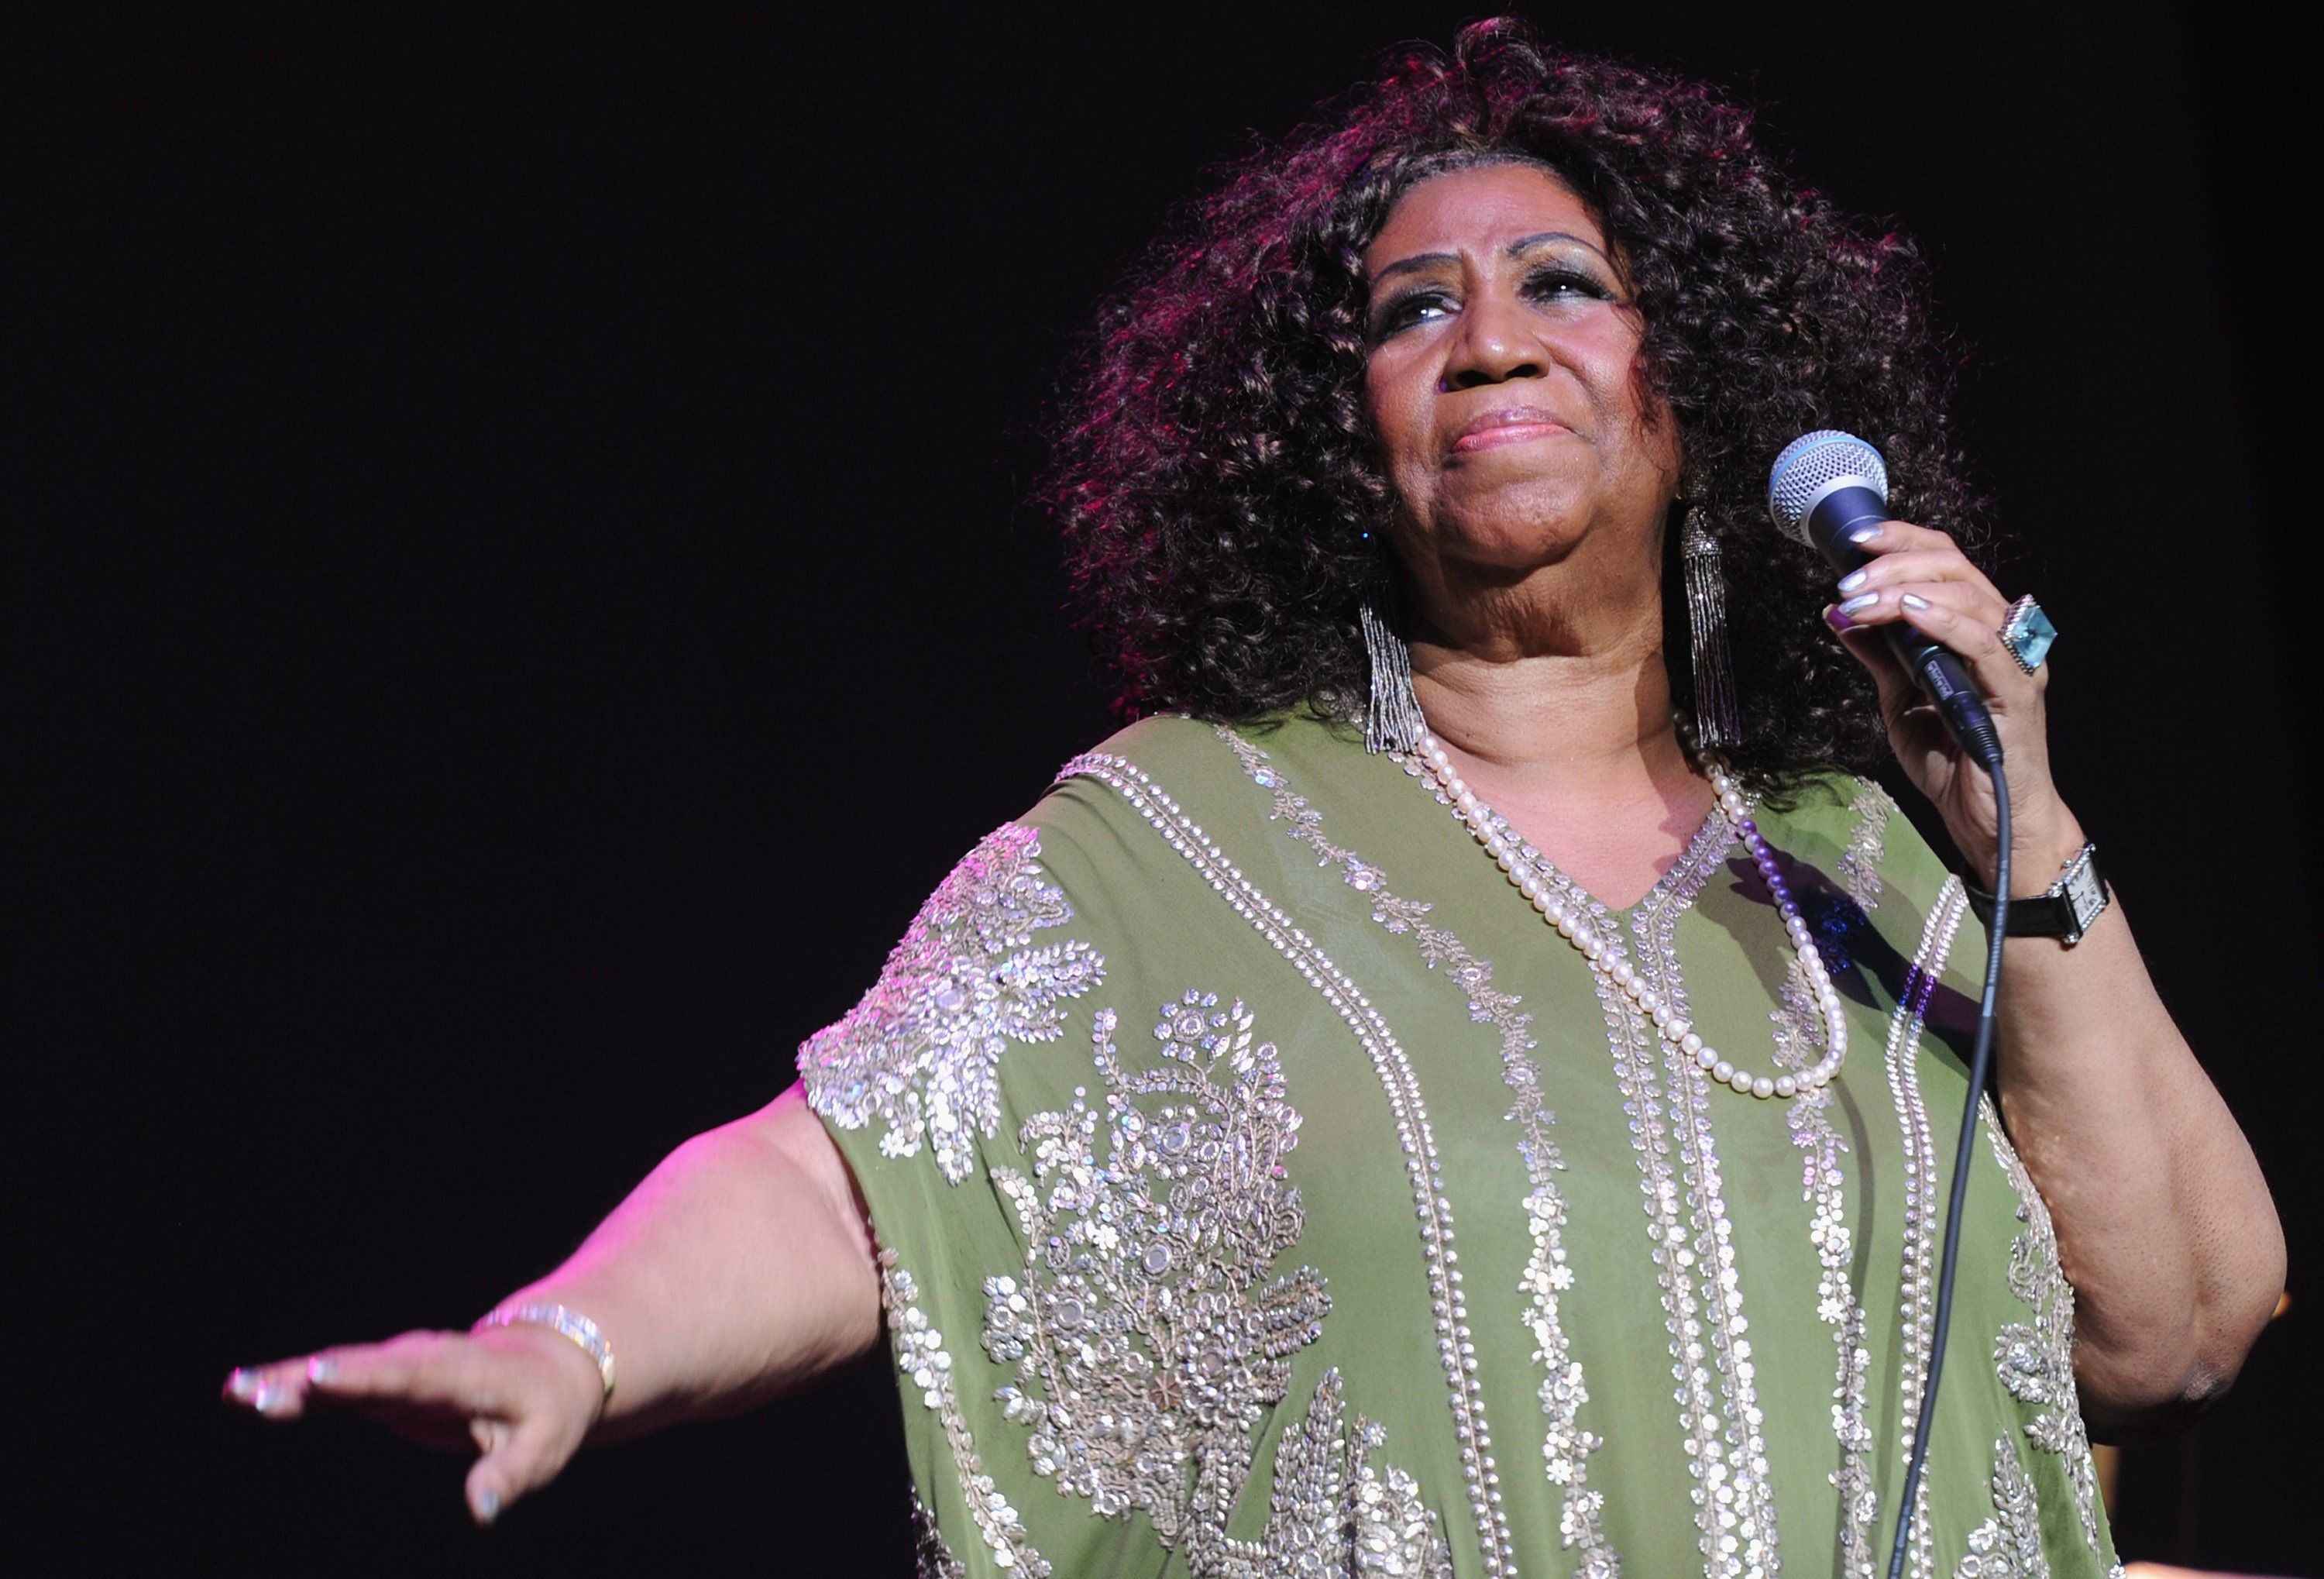 Aretha Franklin performing at the Fox Theatre in Atlanta, Georgia in March 2012. | Photo: Getty Images